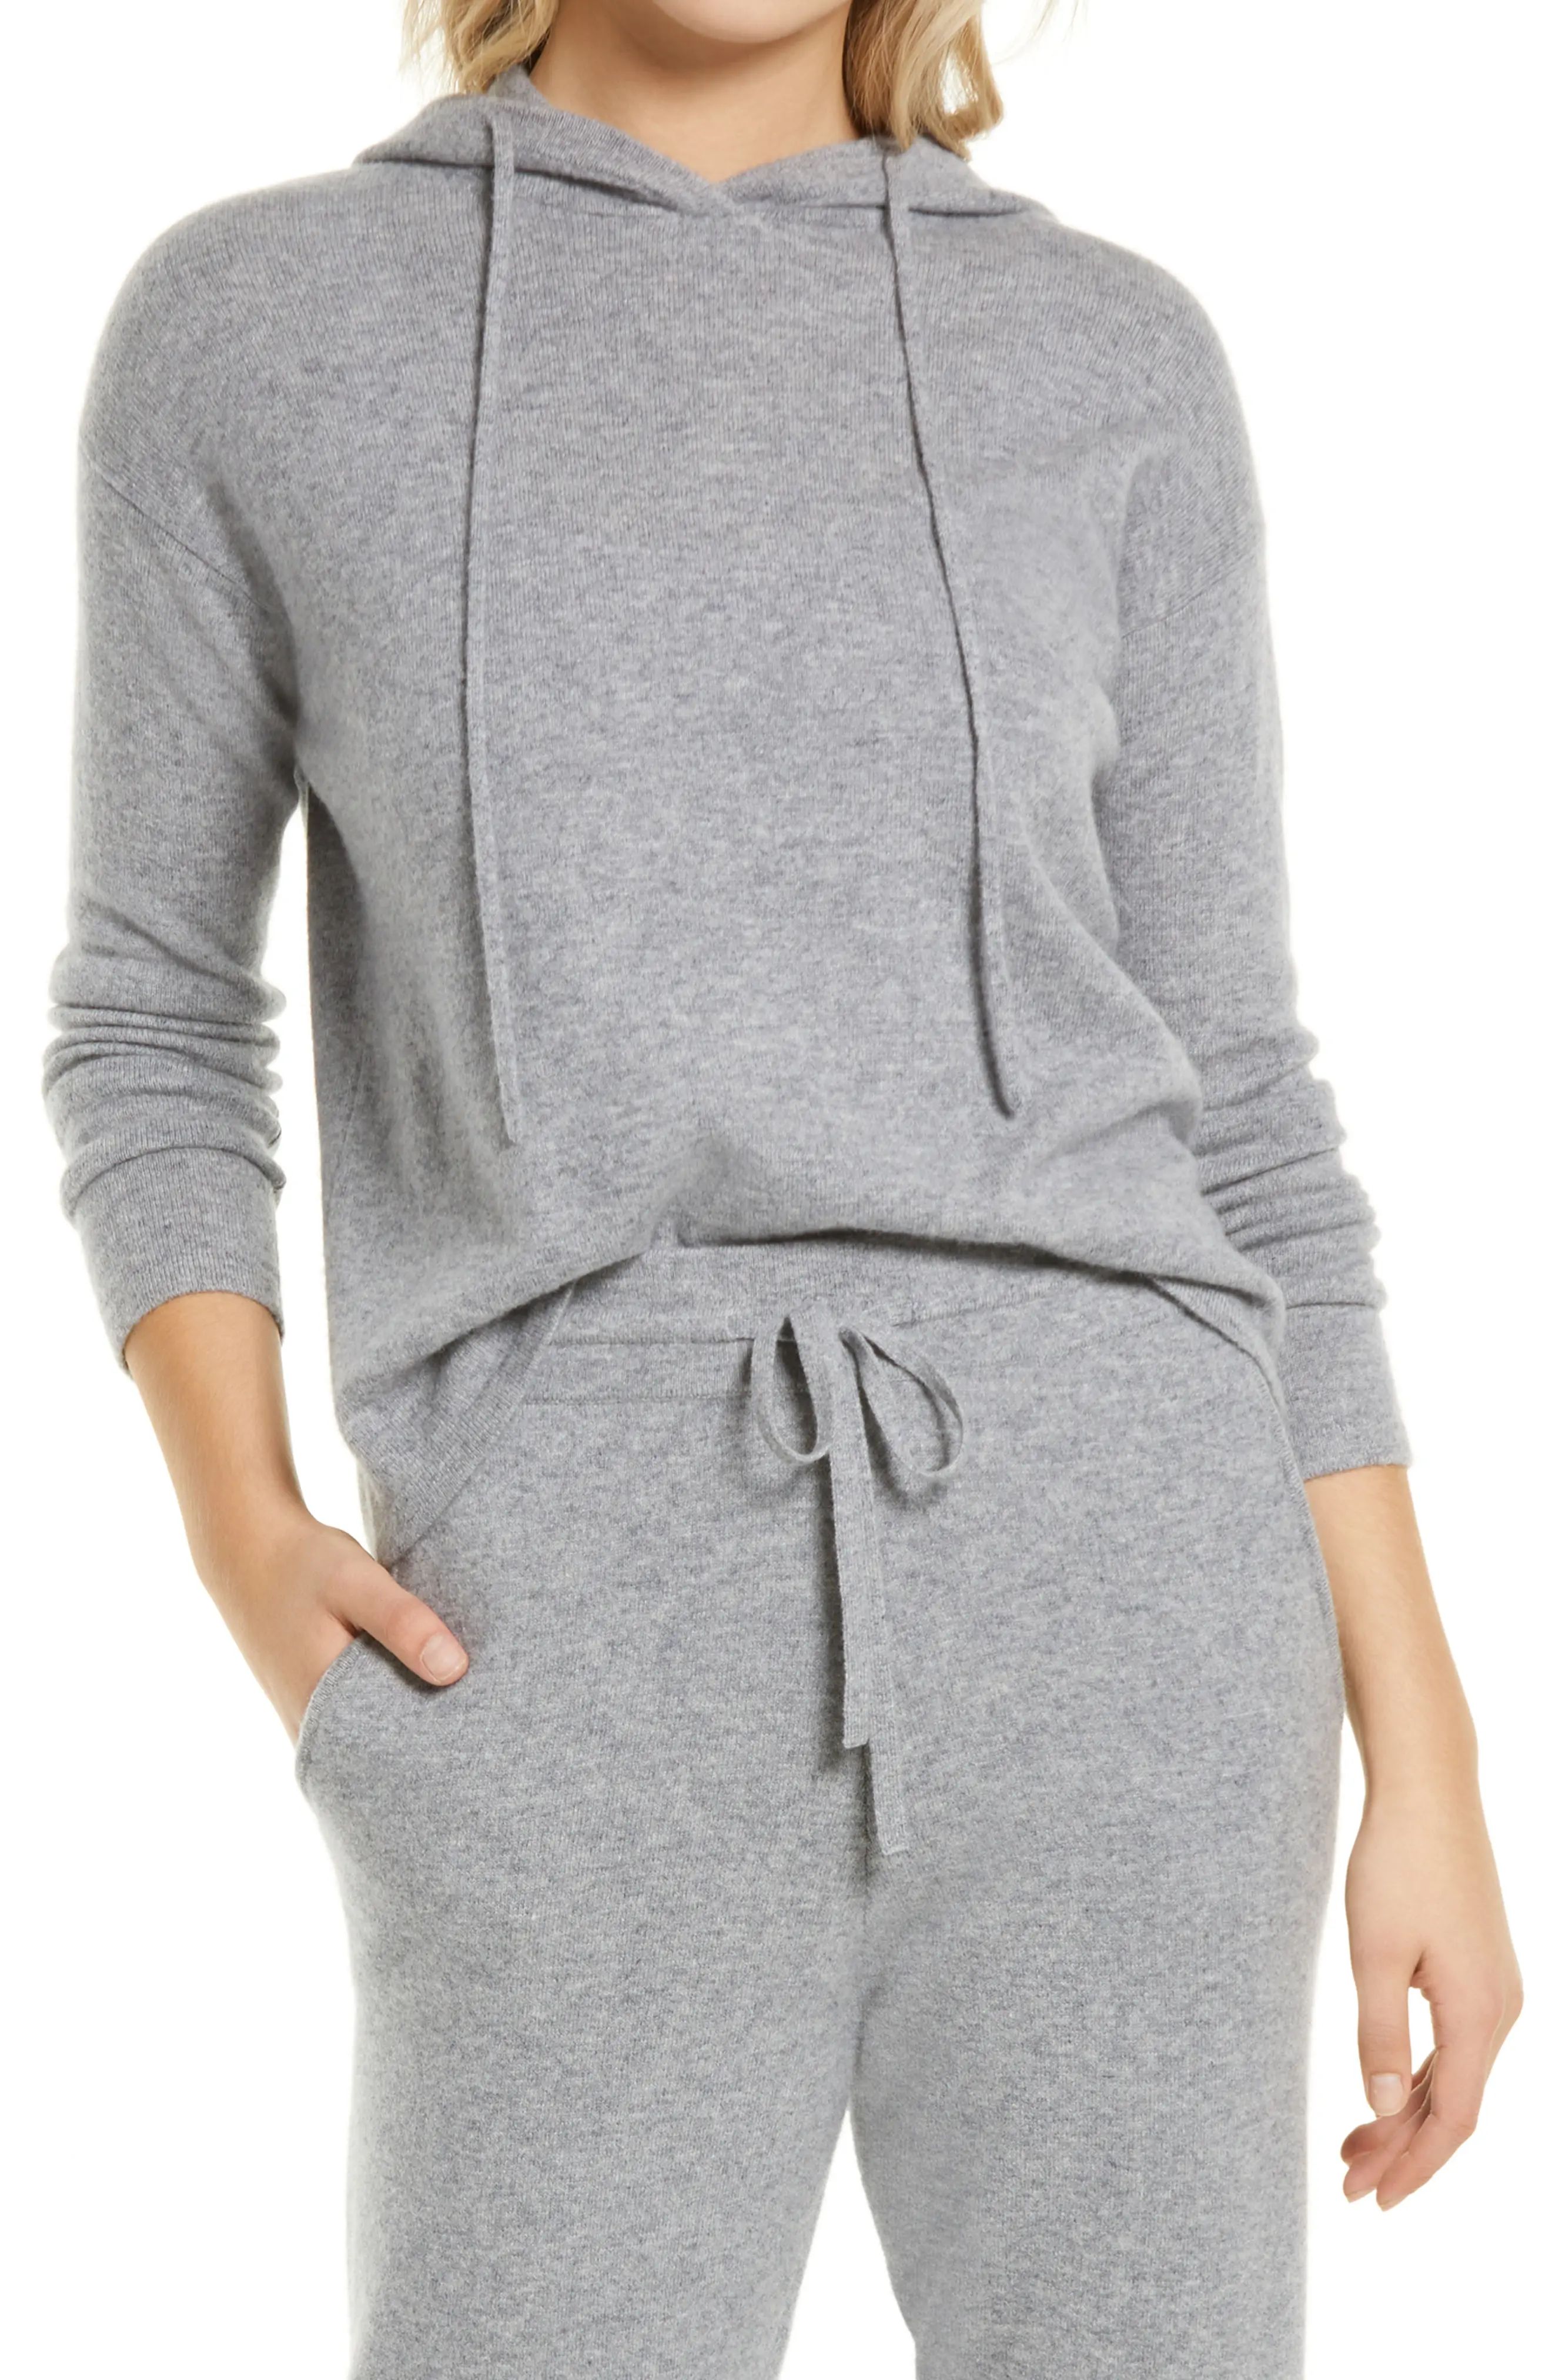 Nordstrom Wool & Cashmere Hoodie, Size X-Large in Grey Heather at Nordstrom | Nordstrom